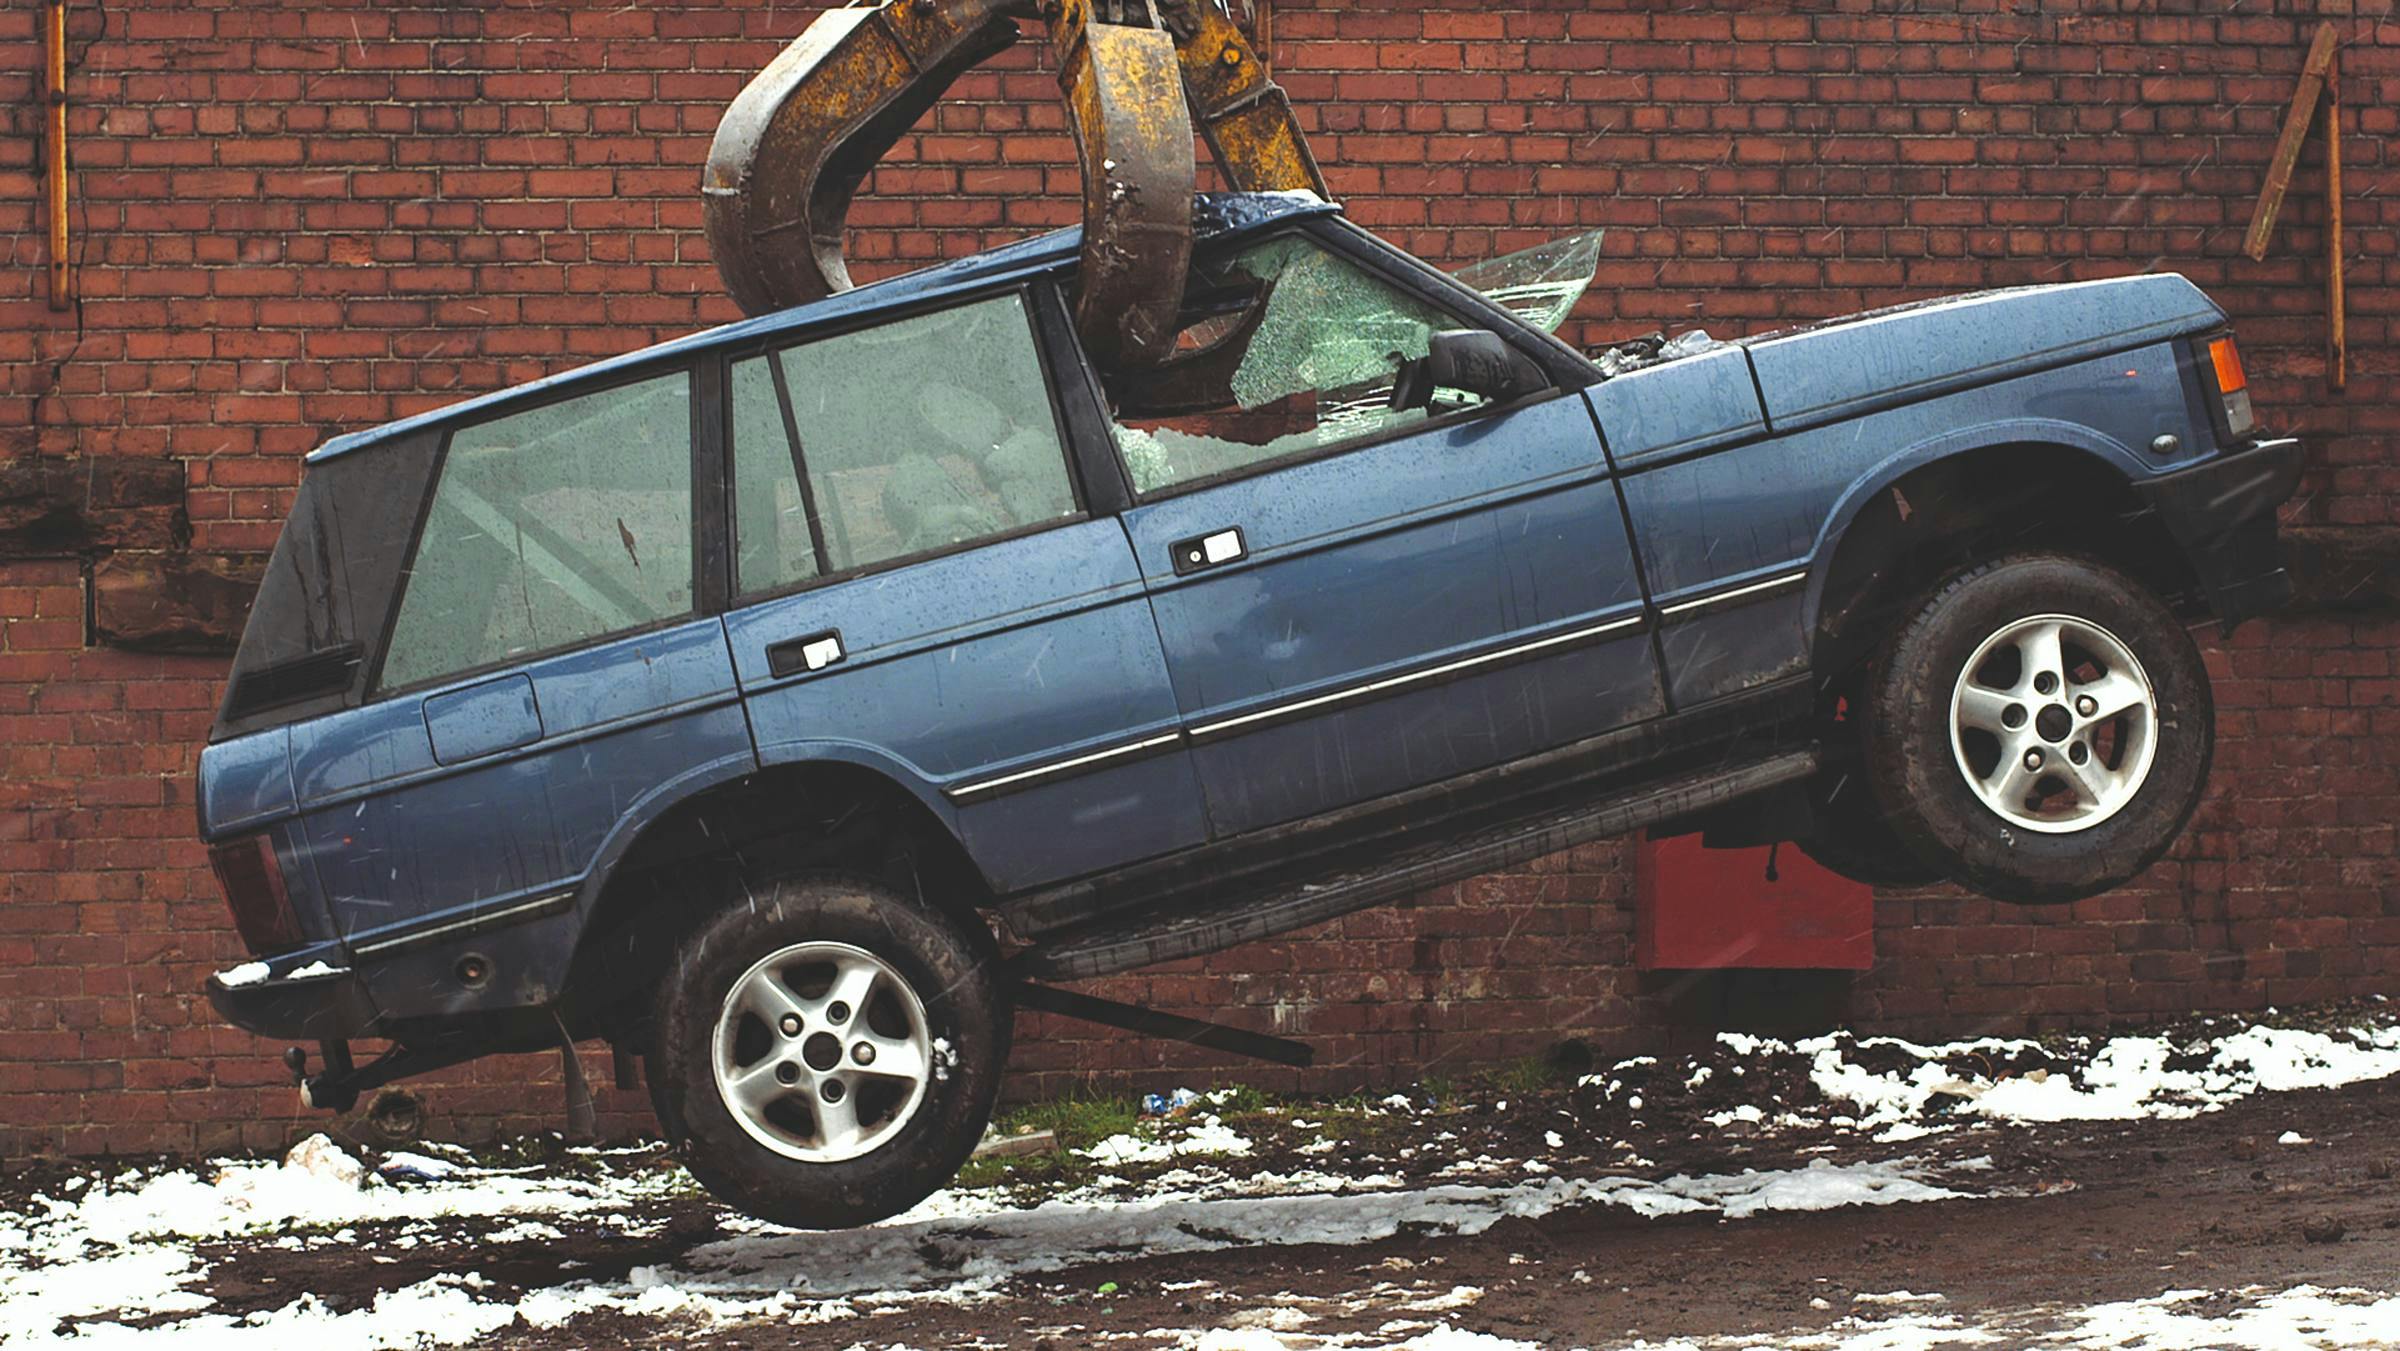 a blue car being lifted by a crane. The forks of the crane have shattered the car's side windows. The ground has snow on it and we can see a red brick wall in the background